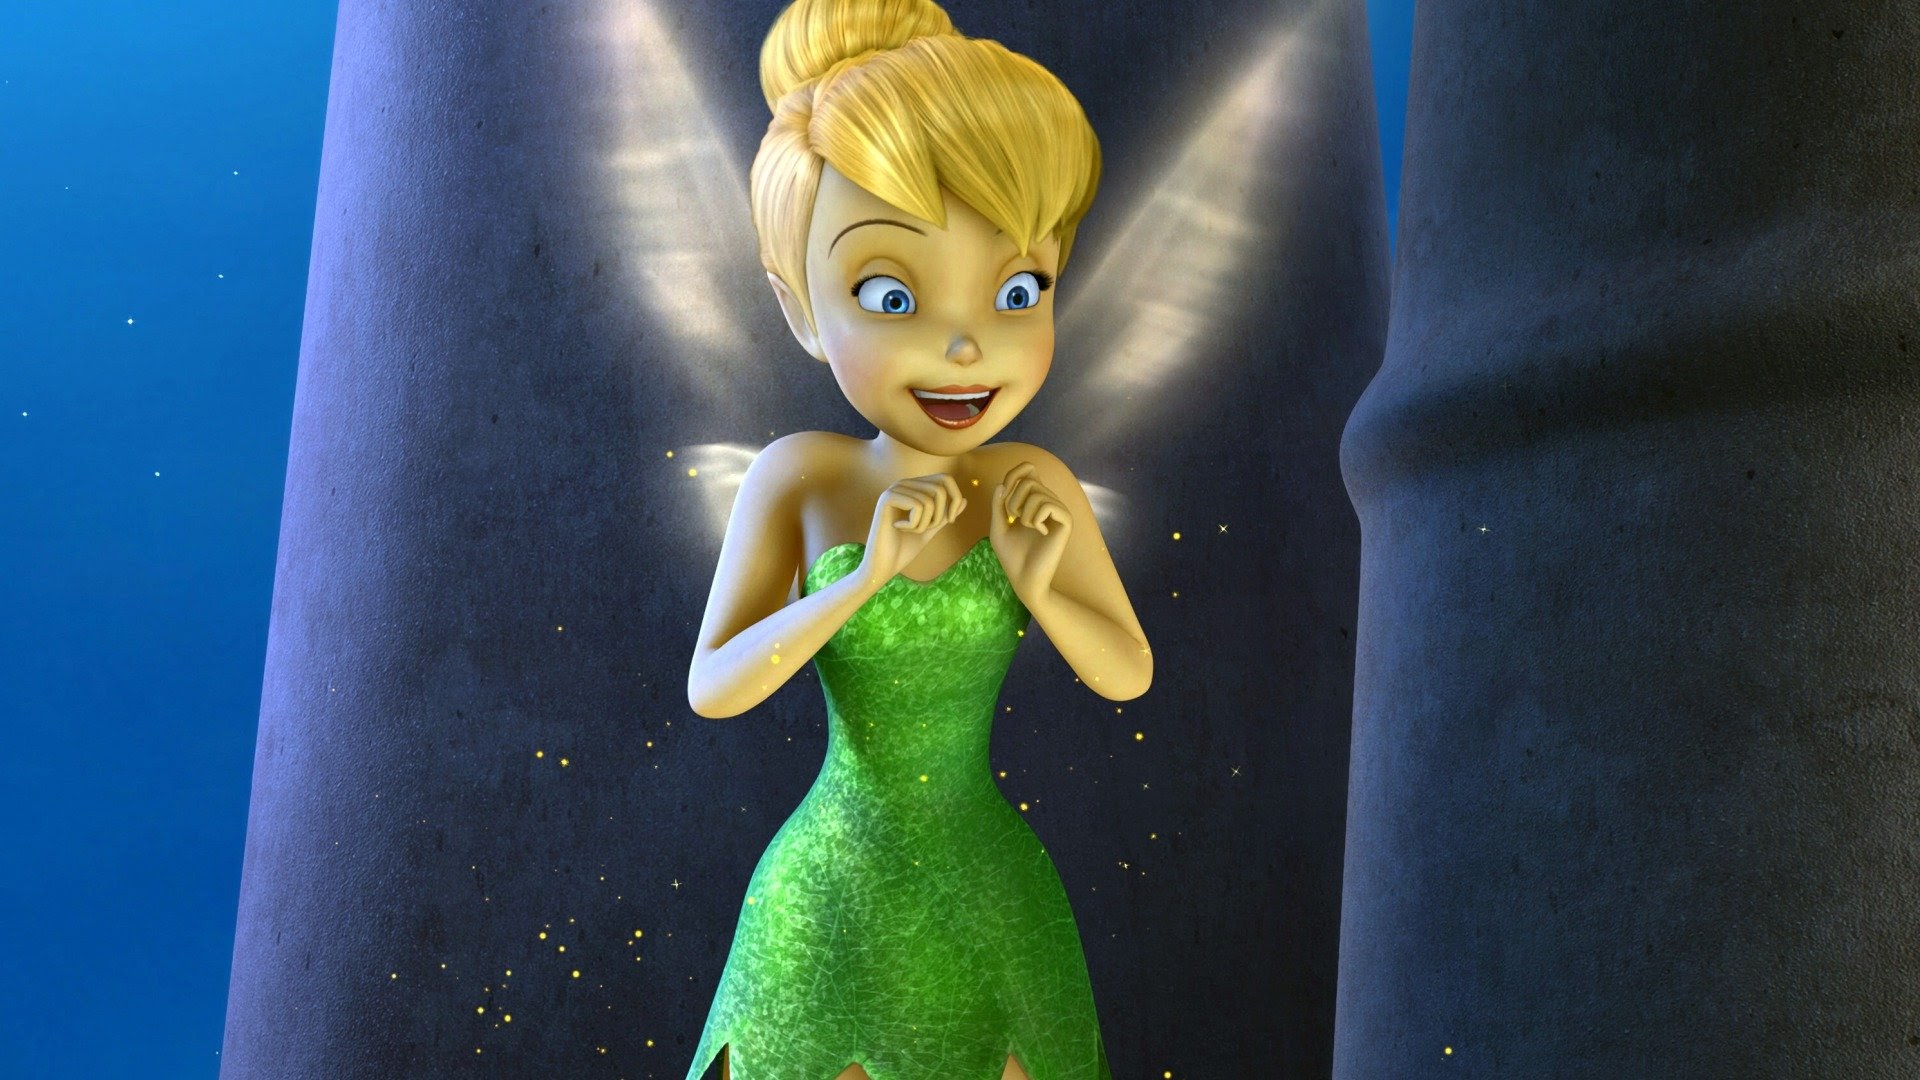 danny cowart recommends tinkerbell 2 full movie pic